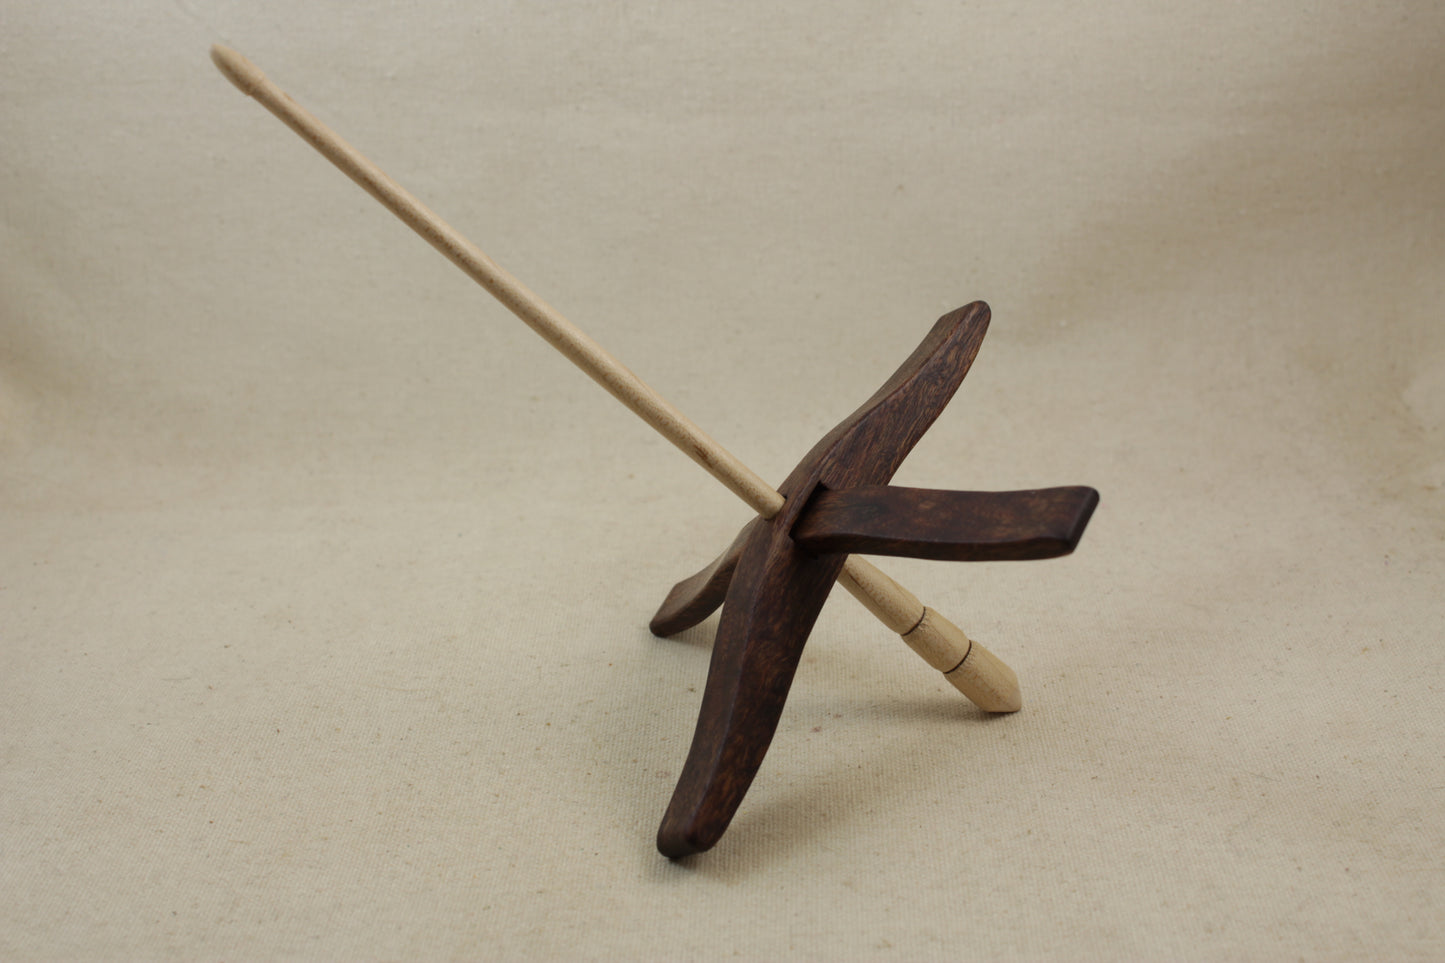 11.18.09 Bolivian Rosewood Full Size Glider Turkish Drop Spindle